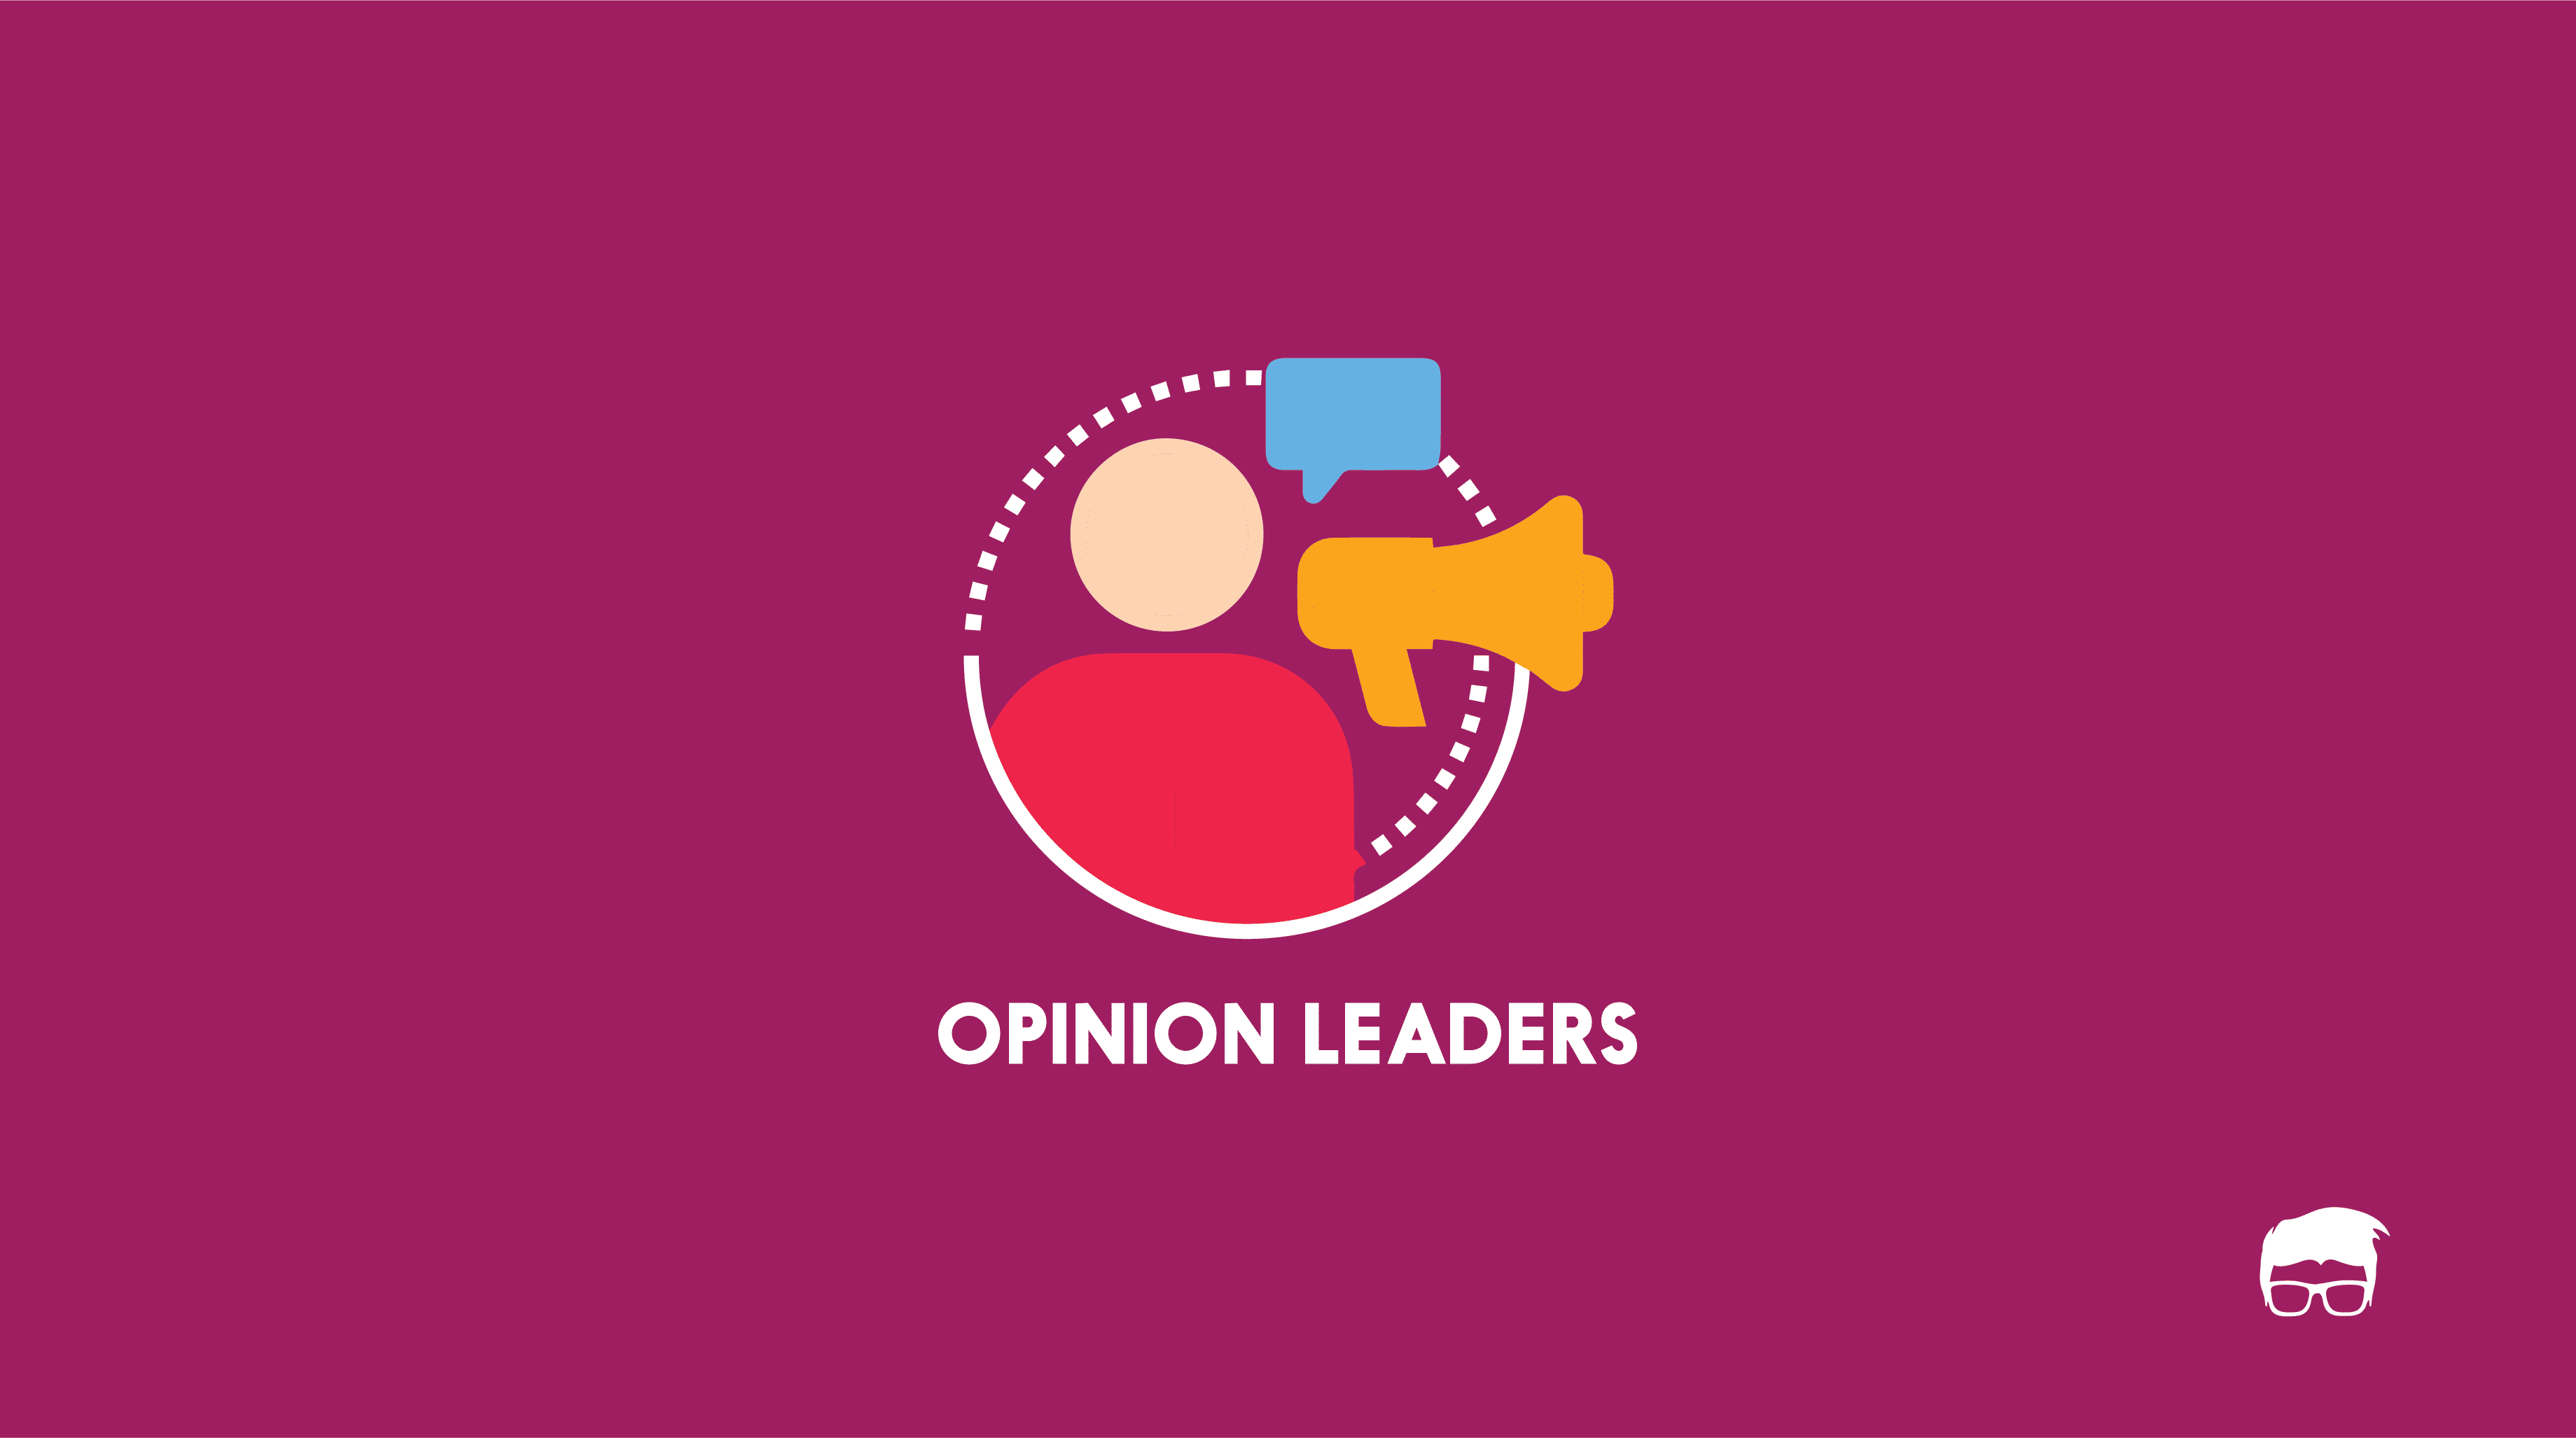 Who are Opinion Leaders & Why Are They Important?